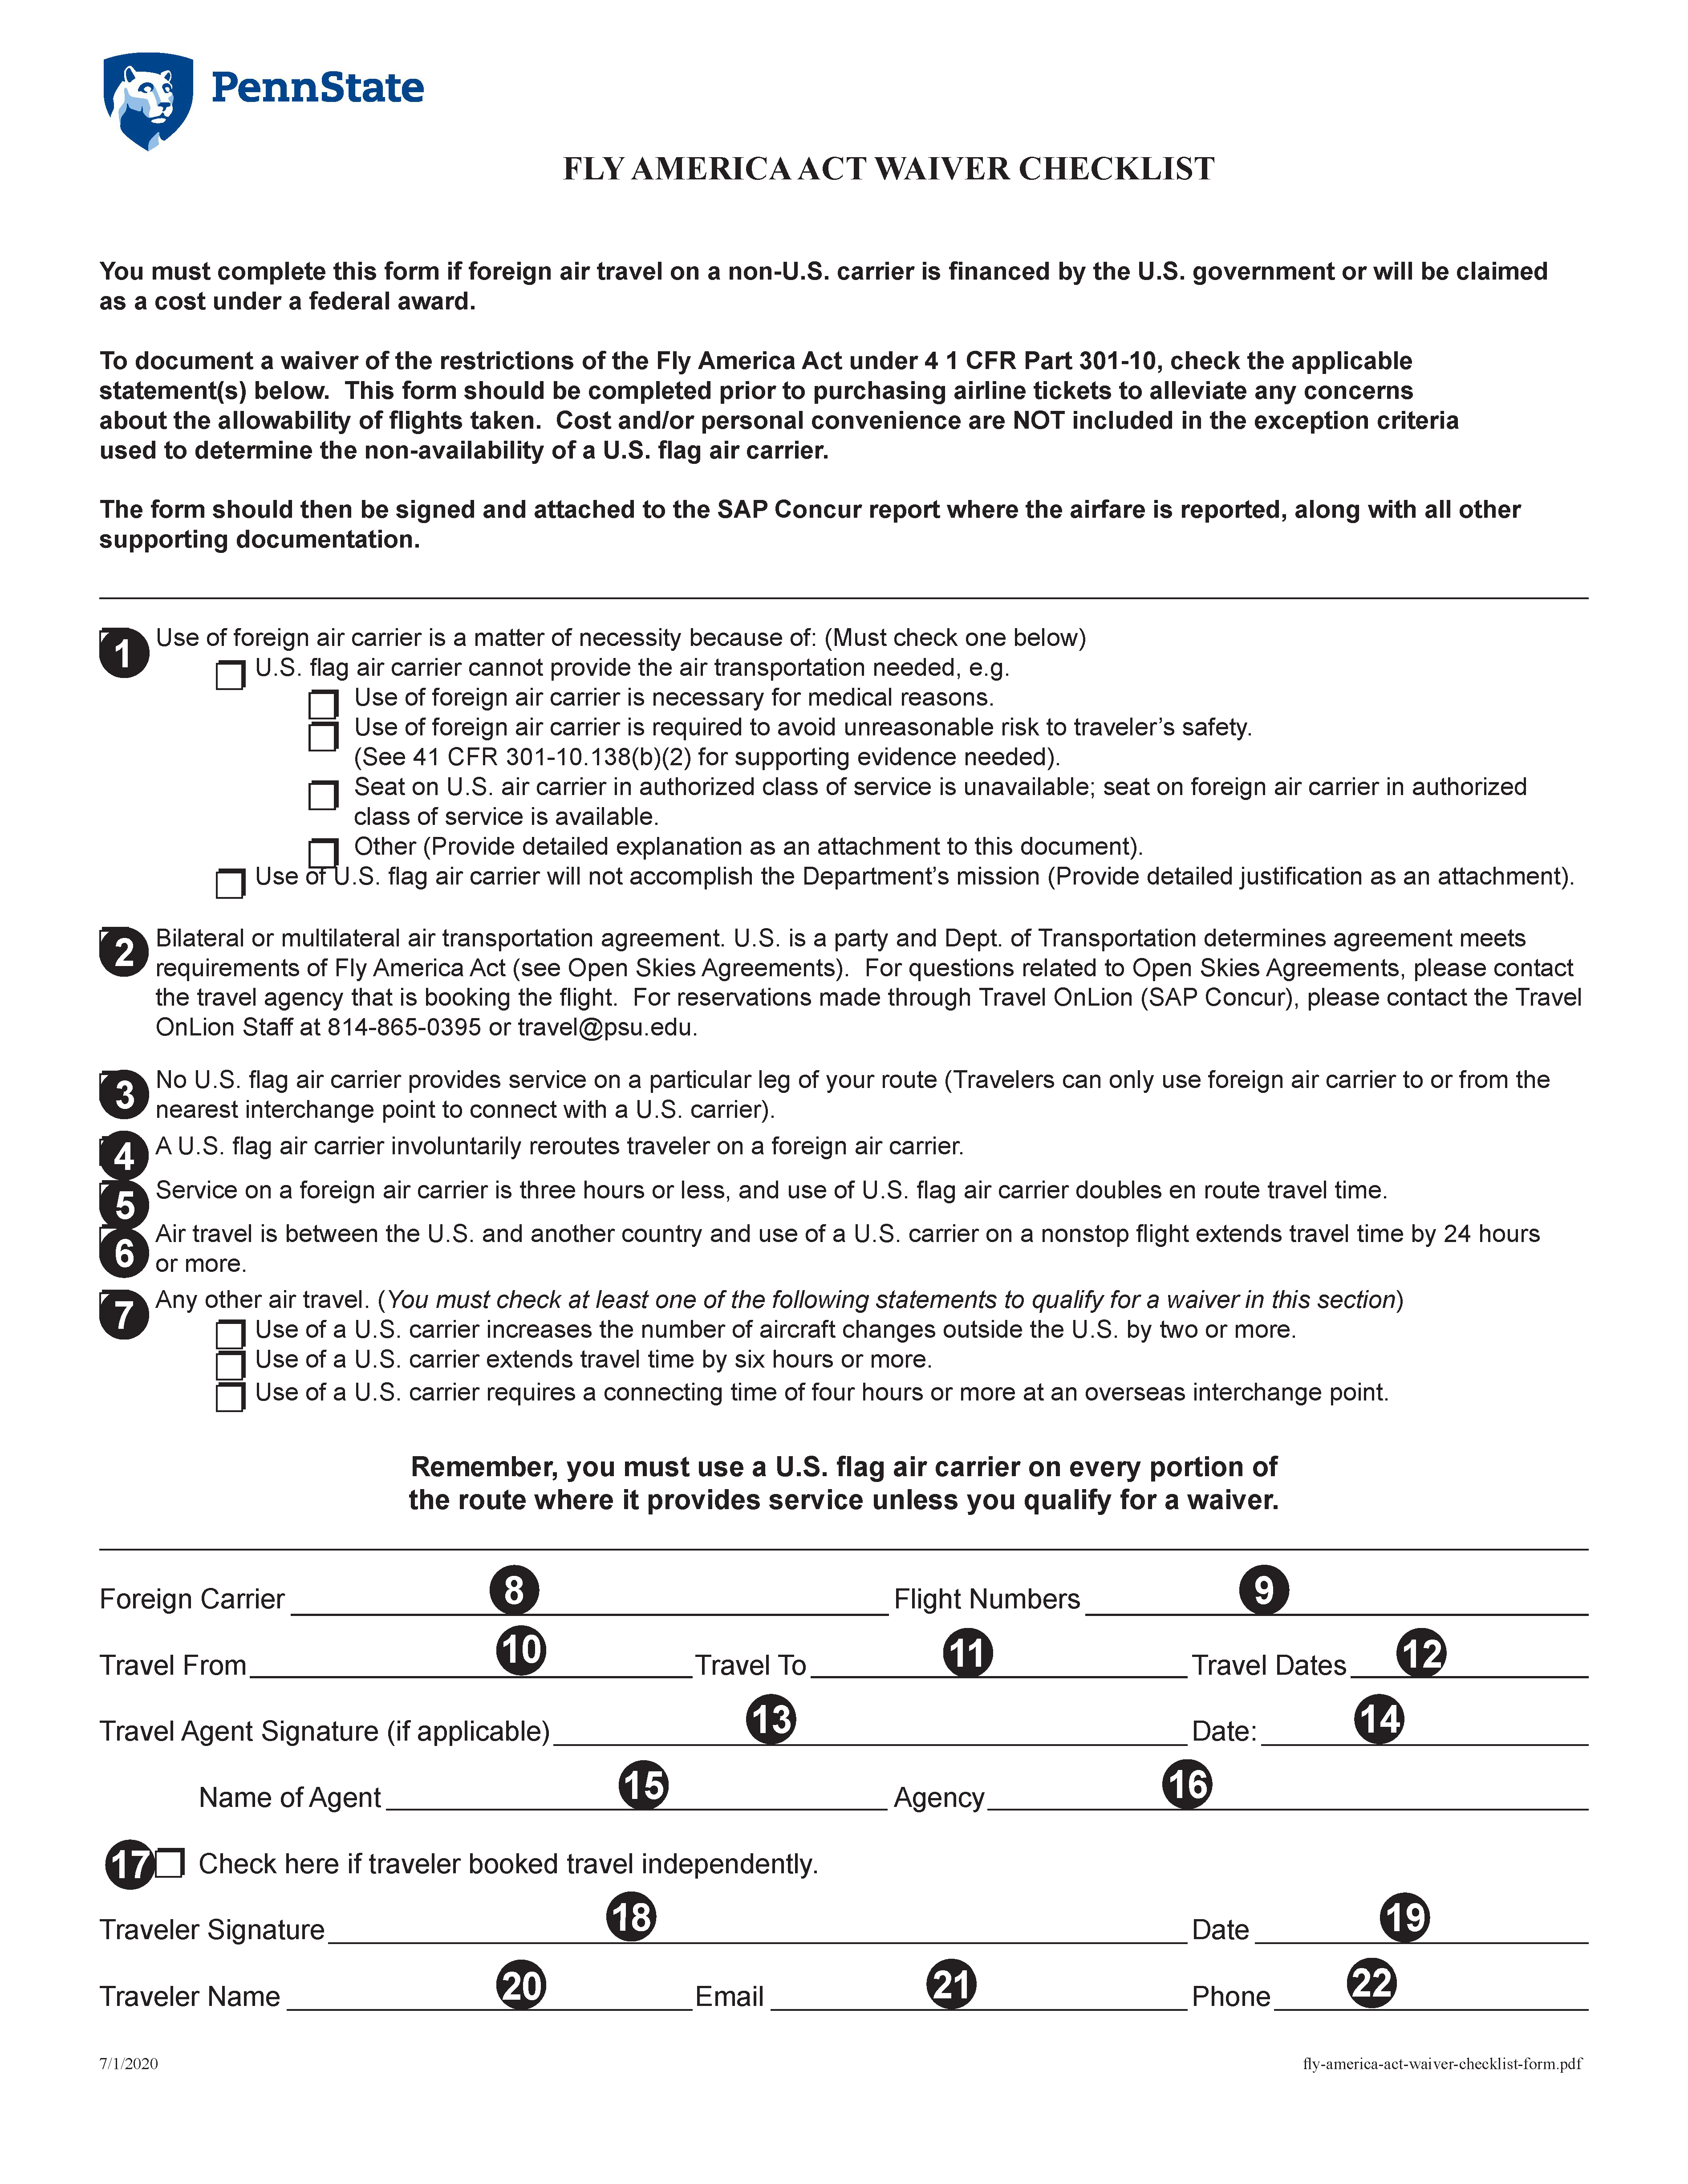 Image Of Fly America Act Waiver Checklist Form